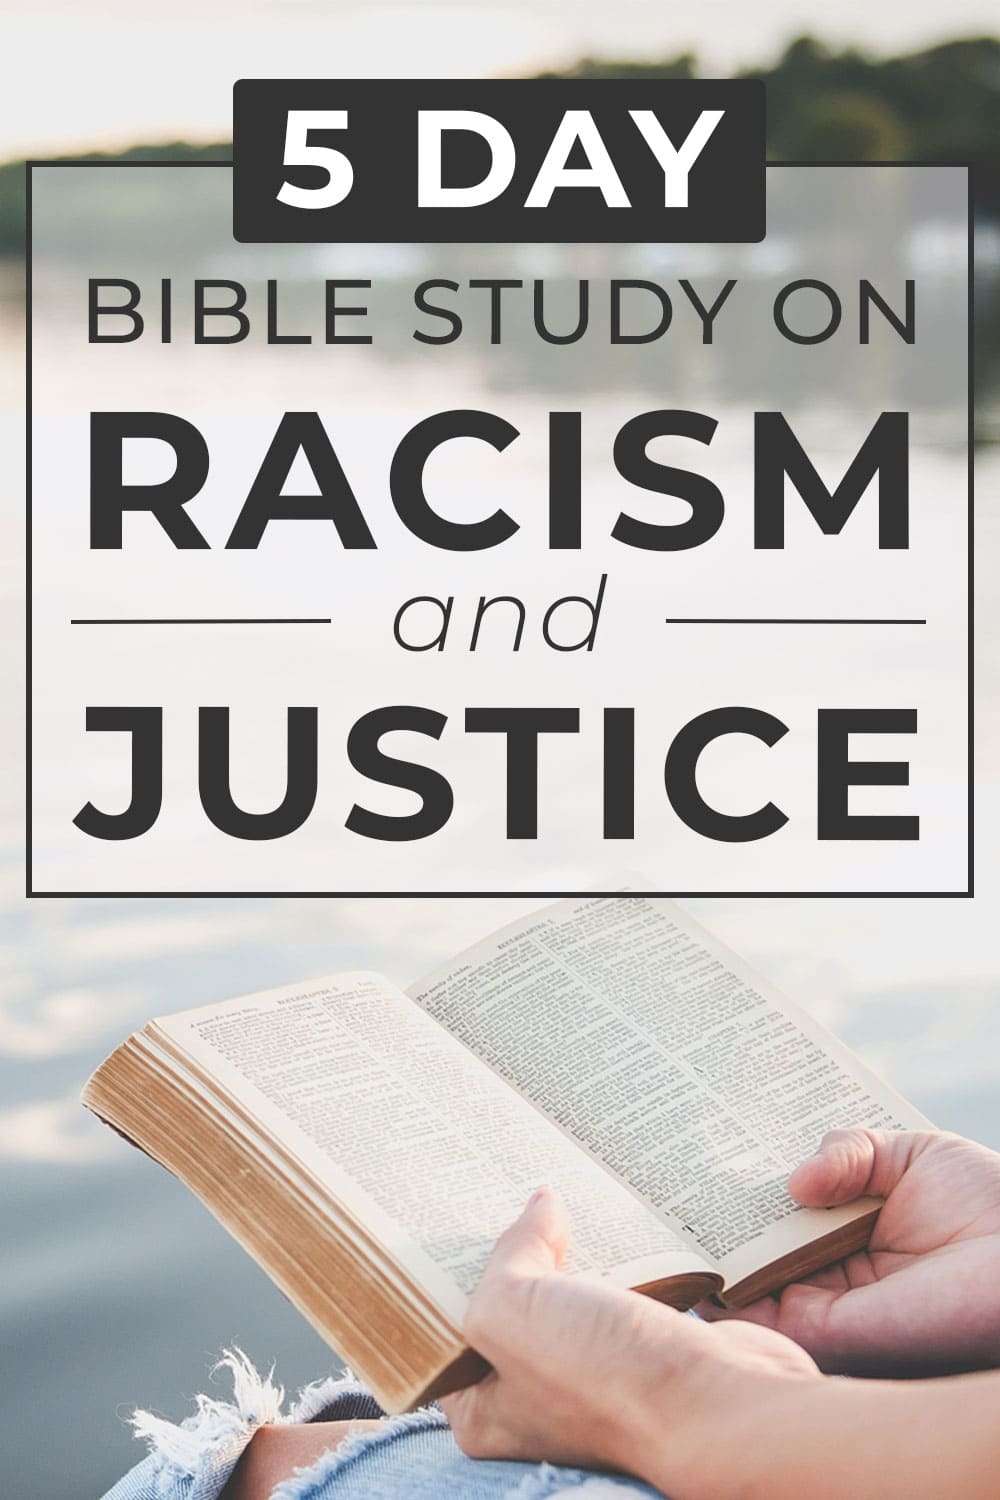 5 Day Bible Study on Racism and Justice